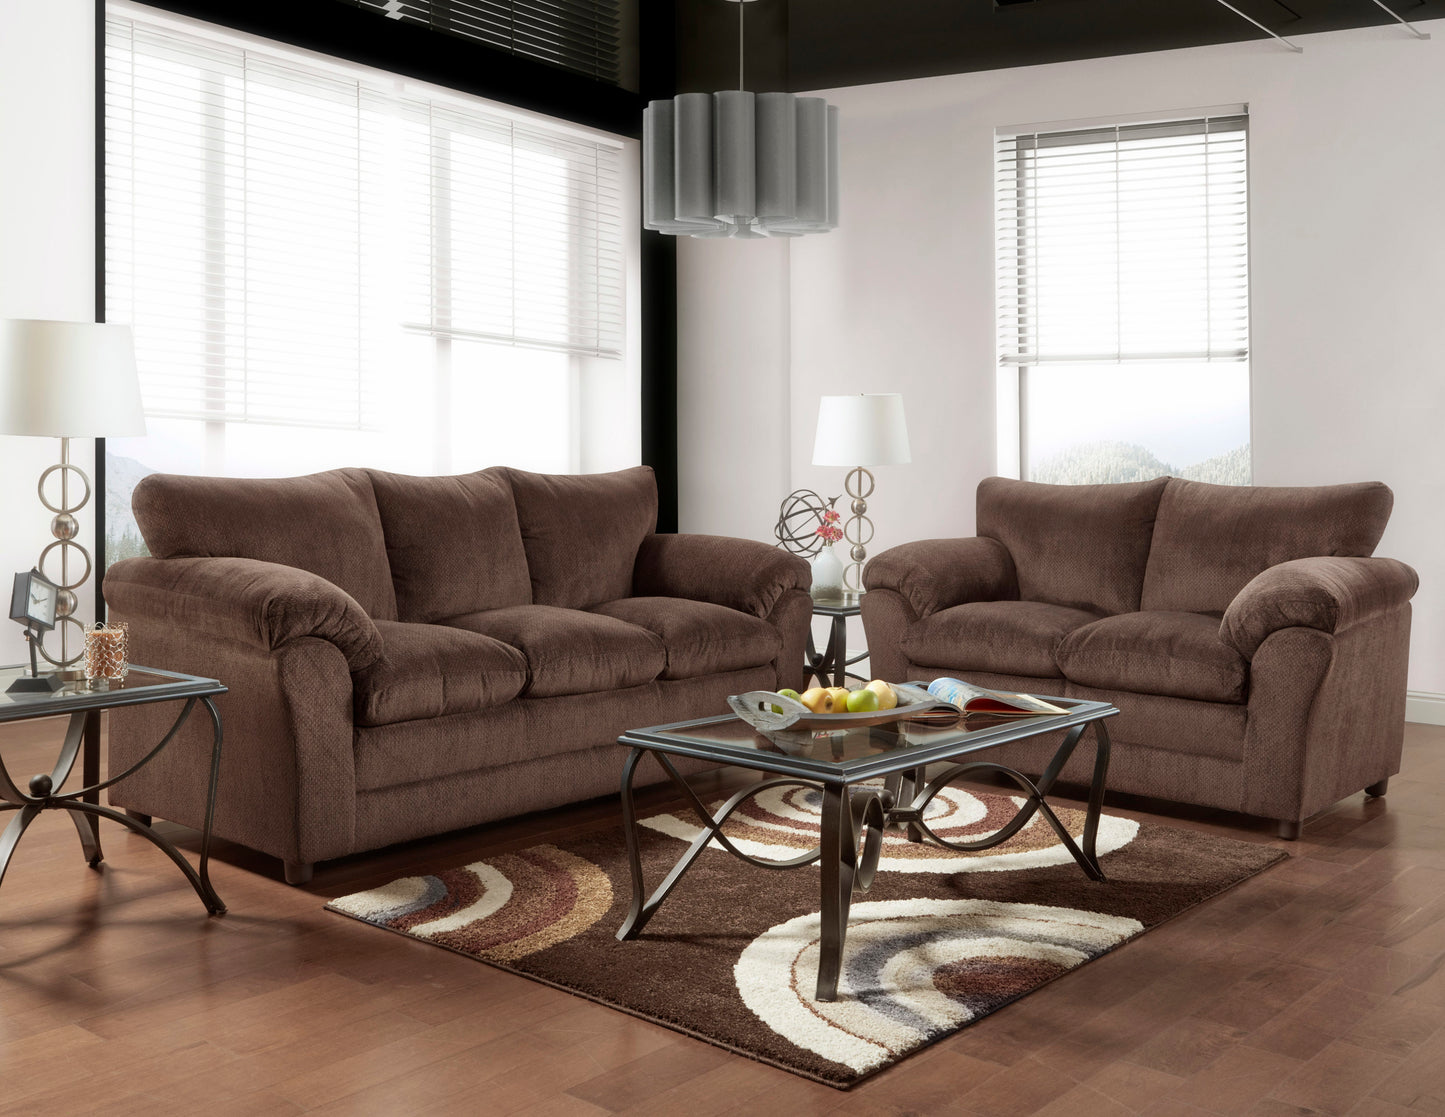 WEEKLY or MONTHLY. Puffy Grey Kennedy Sofa and Loveseat